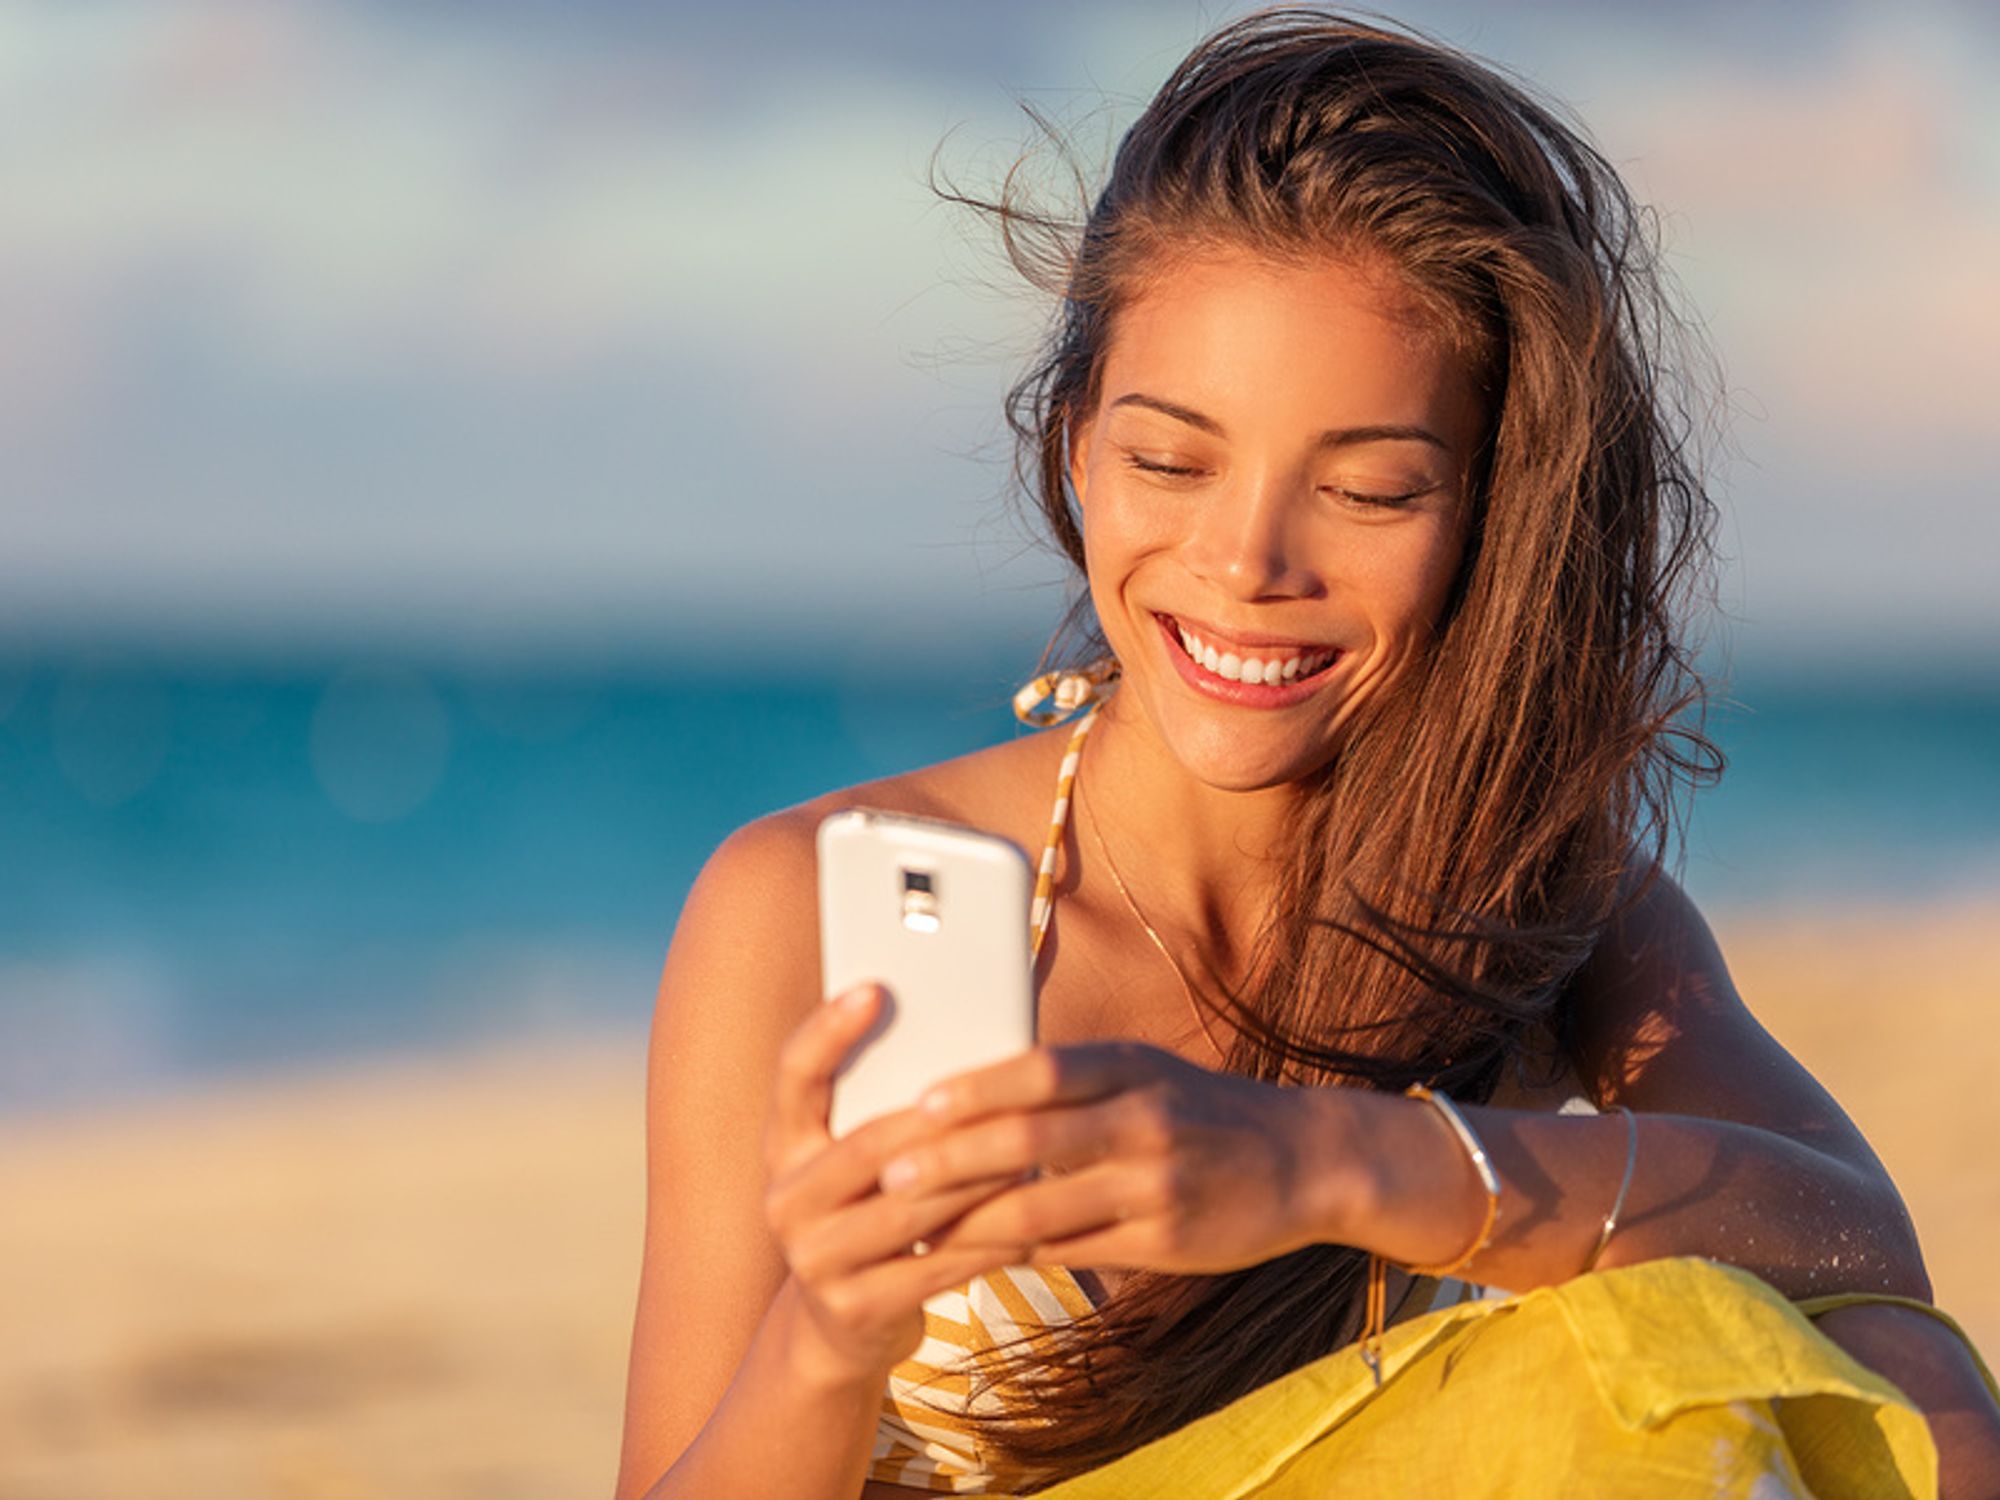 Young woman networks briefly on her phone while on summer vacation.